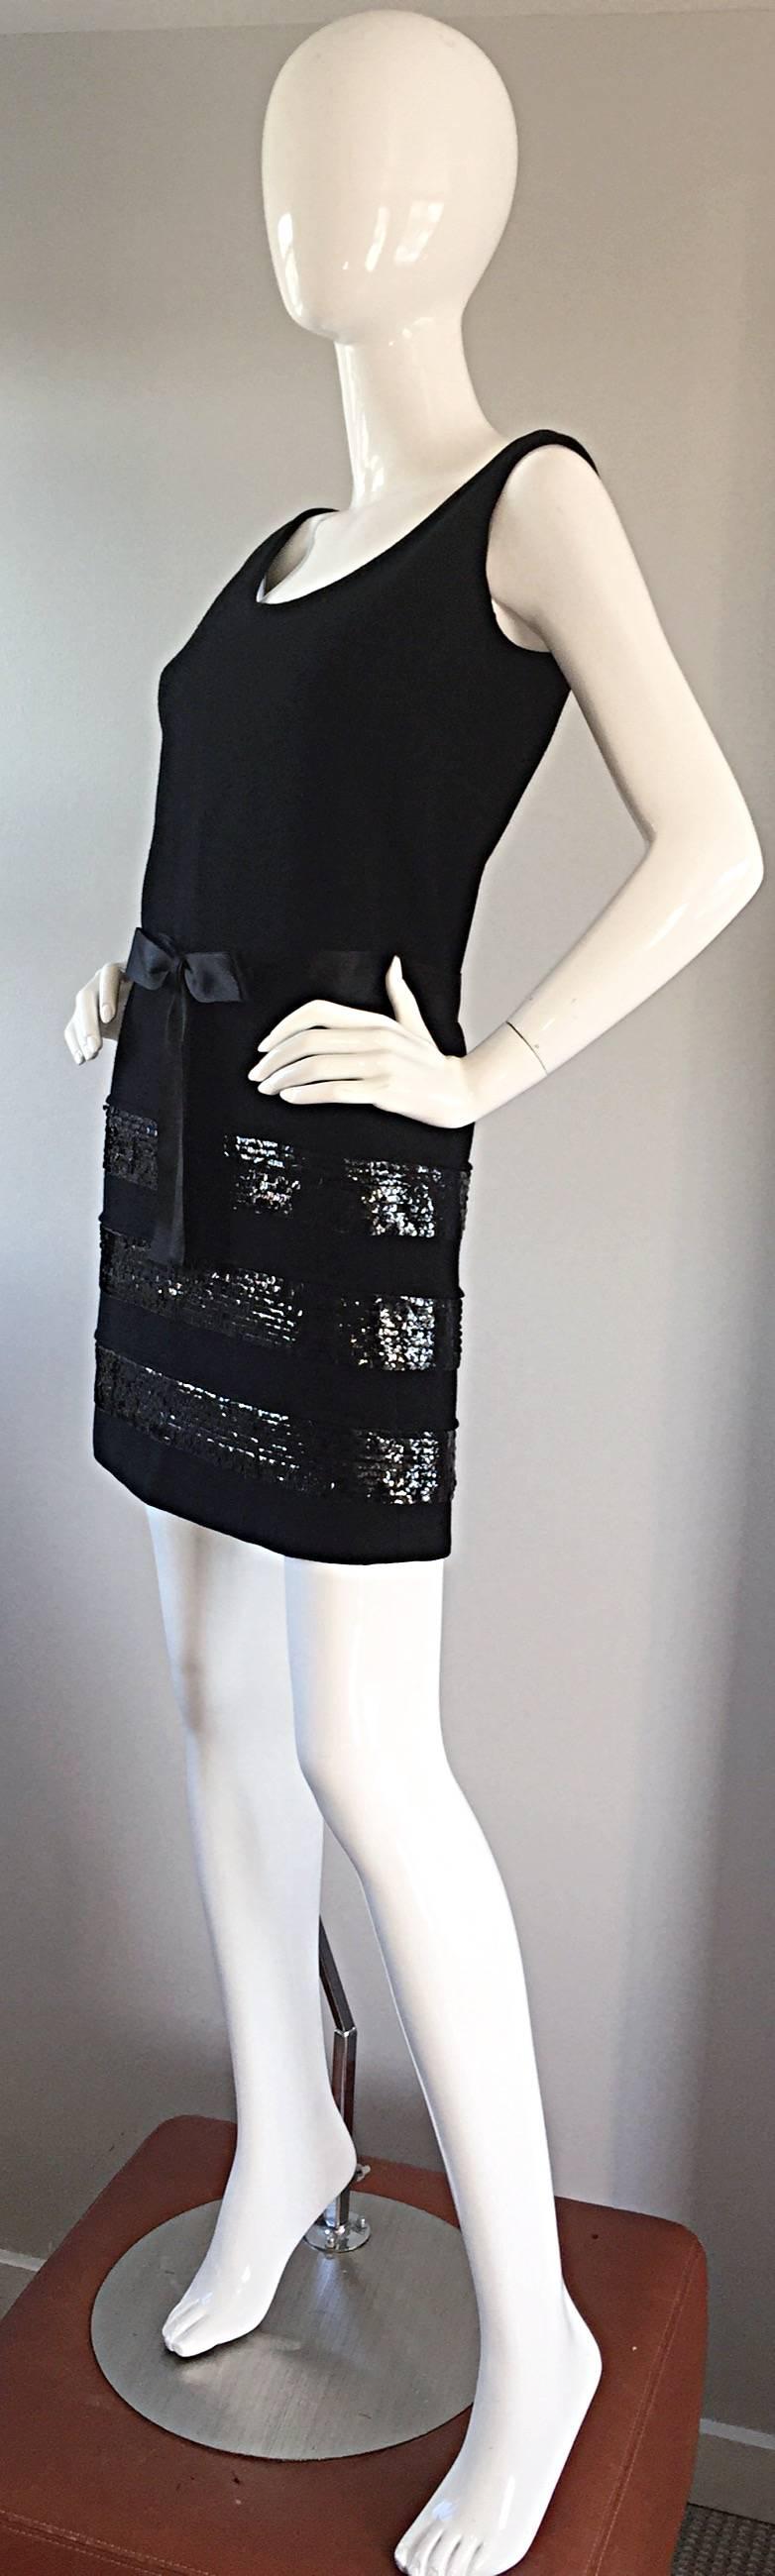 1960s Chester Weinberg Chic Vintage Black Wool + Sequins 60s Shift Dress w/ Bow For Sale 2